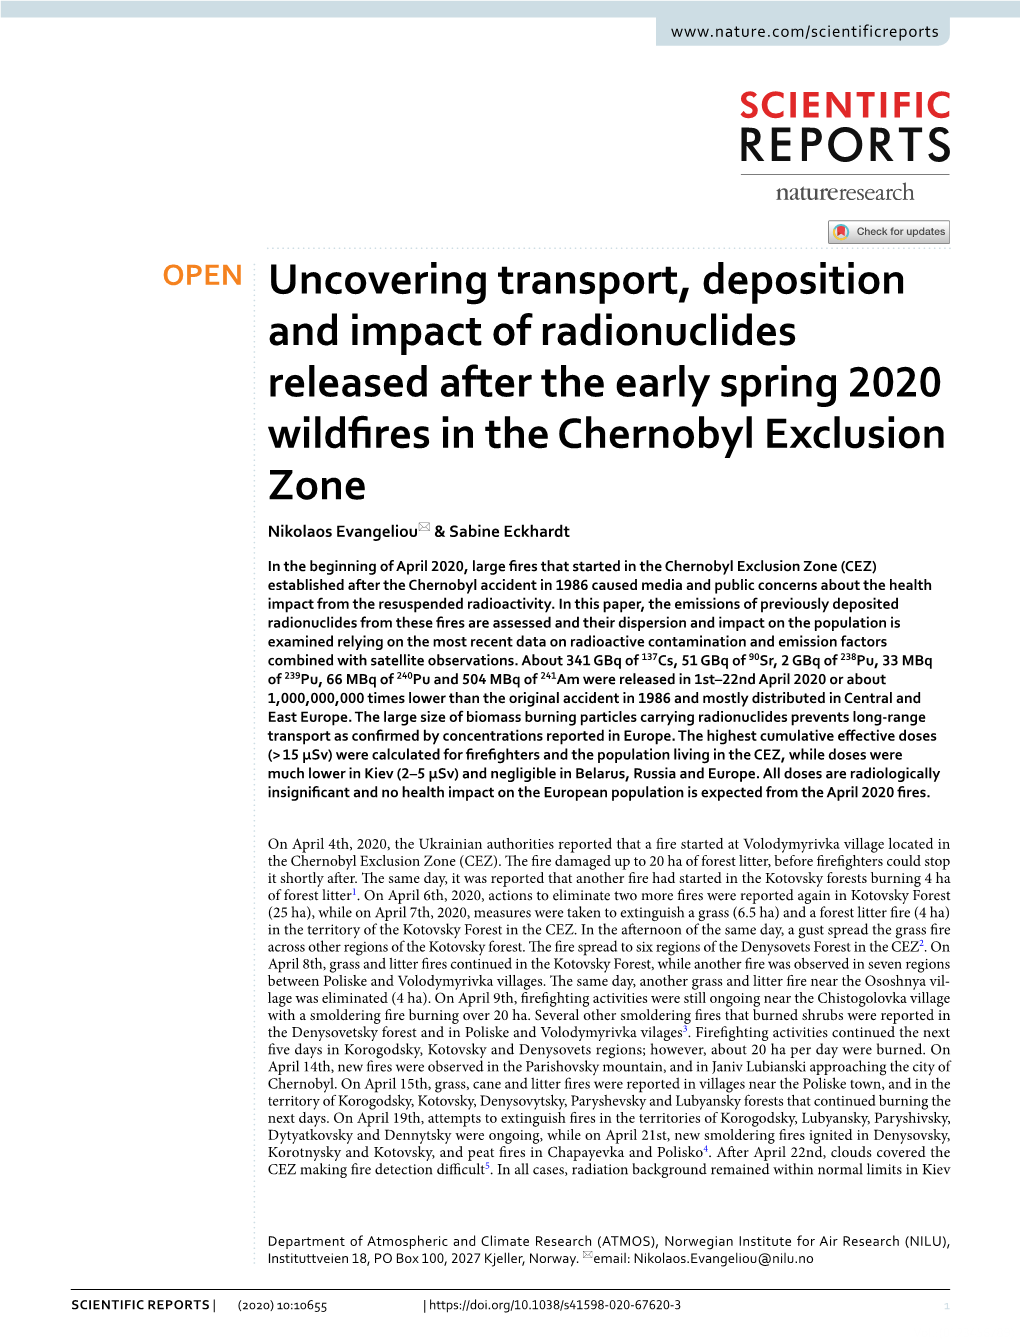 Uncovering Transport, Deposition and Impact of Radionuclides Released